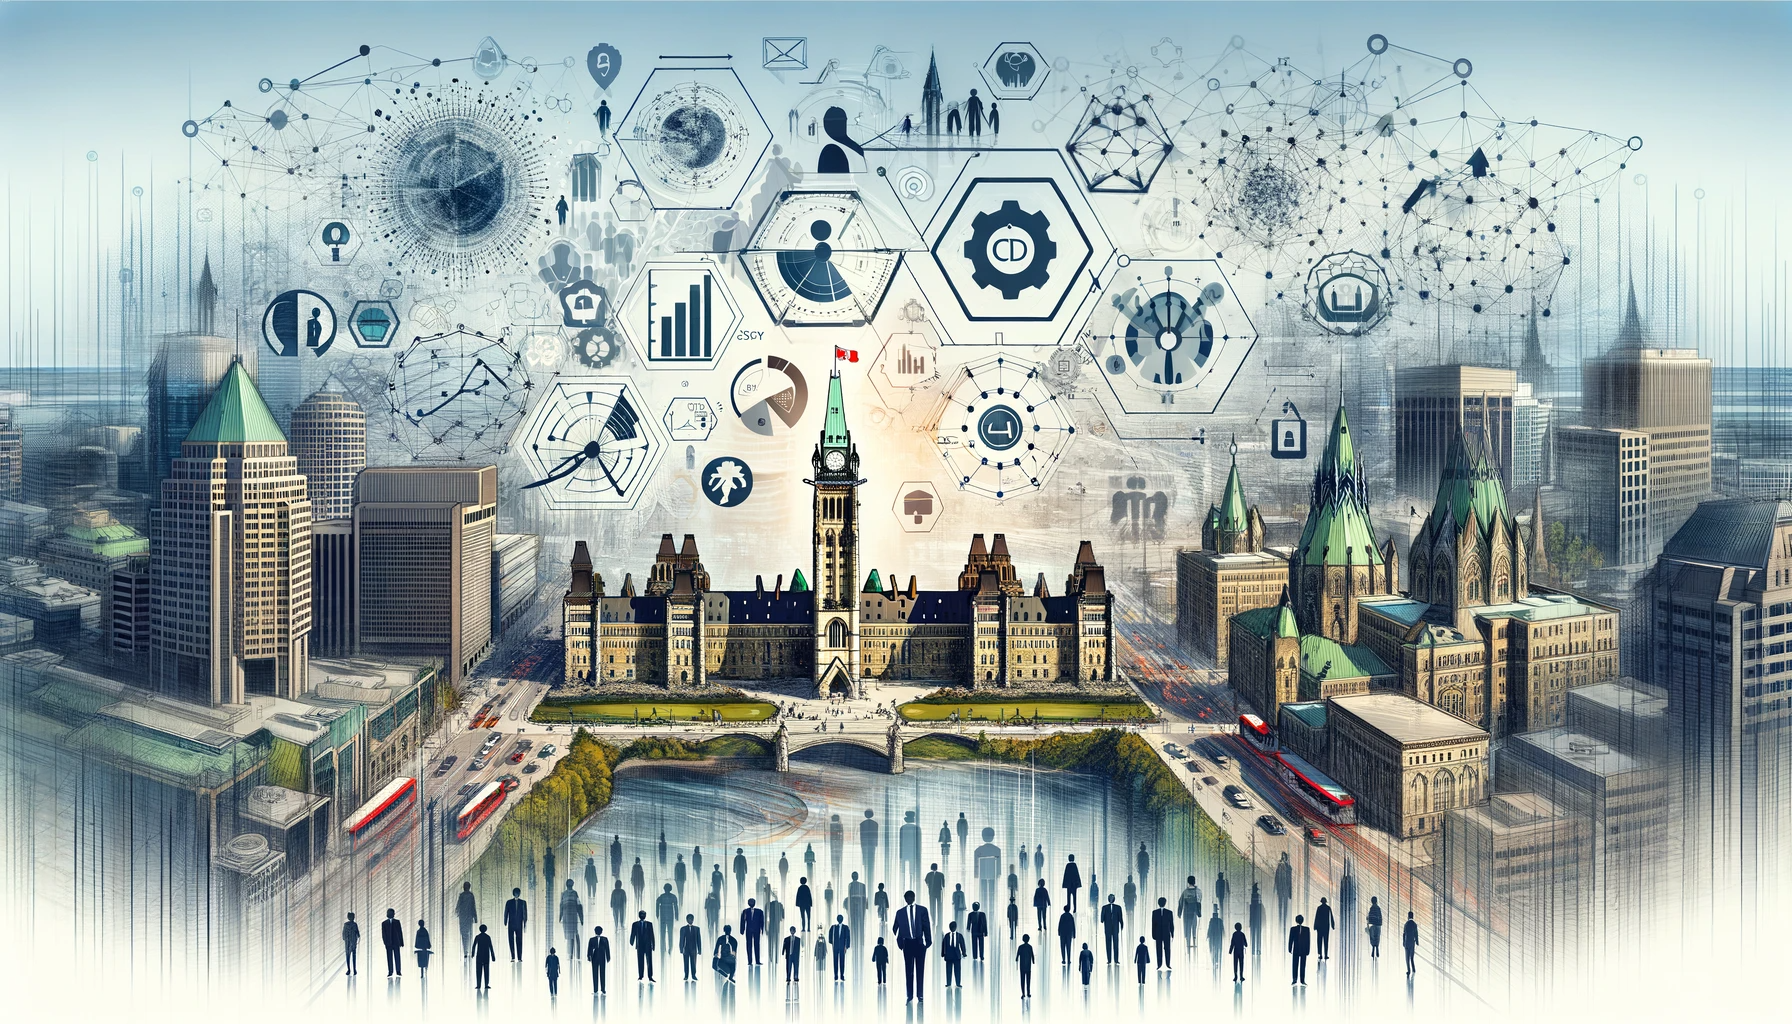 Abstract illustration of Ottawa's skyline blended with strategic planning and financial icons, symbolizing comprehensive business services